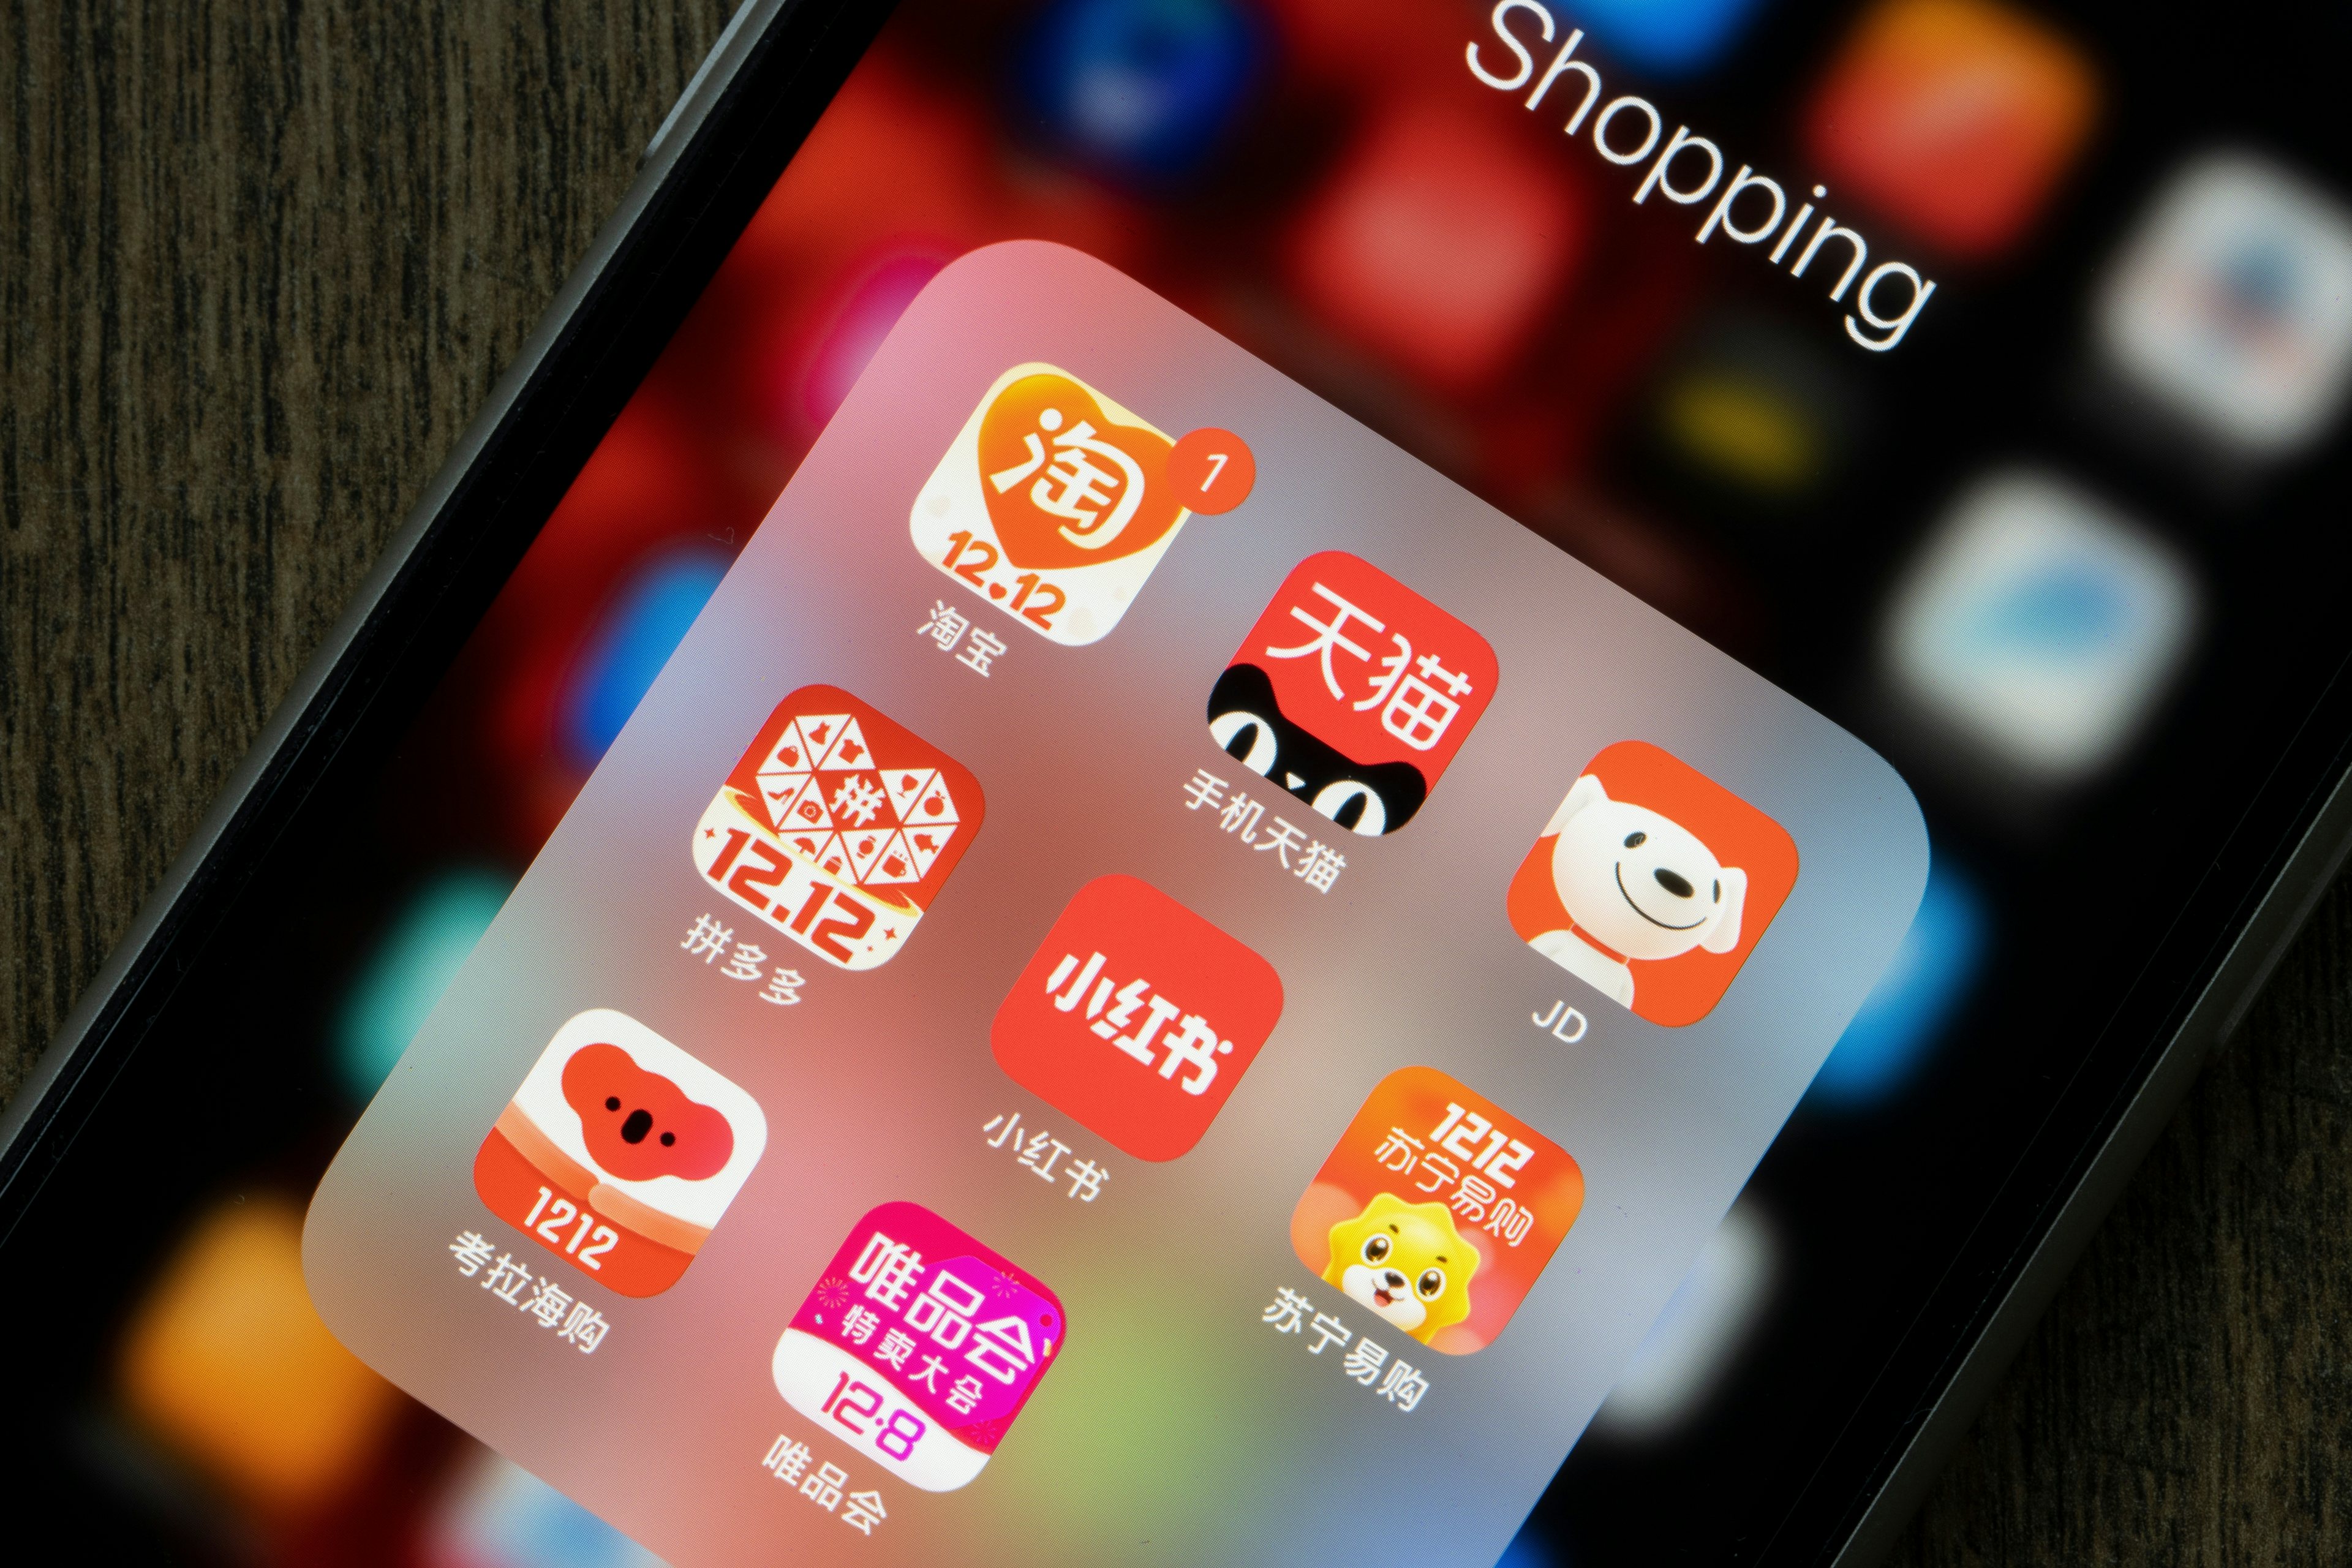 Overseas expansion will propel China's e-commerce giants, forecasts HSBC. Photo: Shutterstock